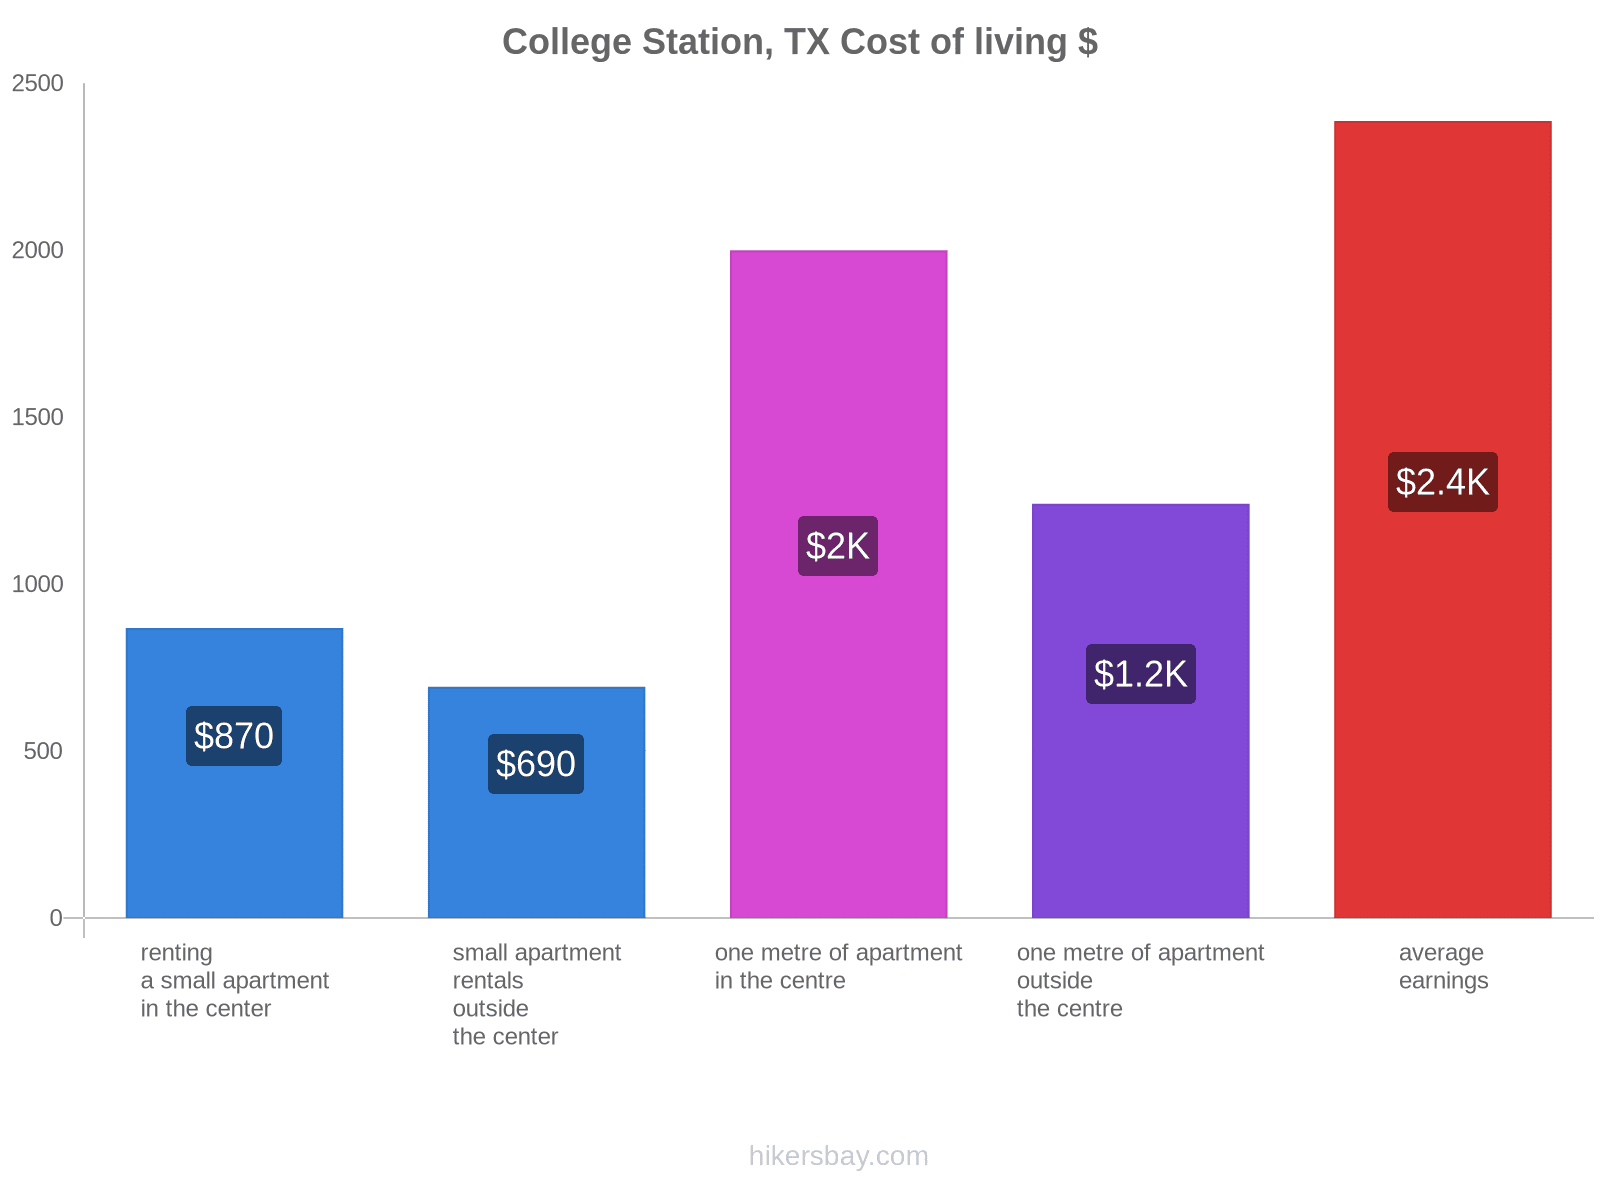 College Station, TX cost of living hikersbay.com